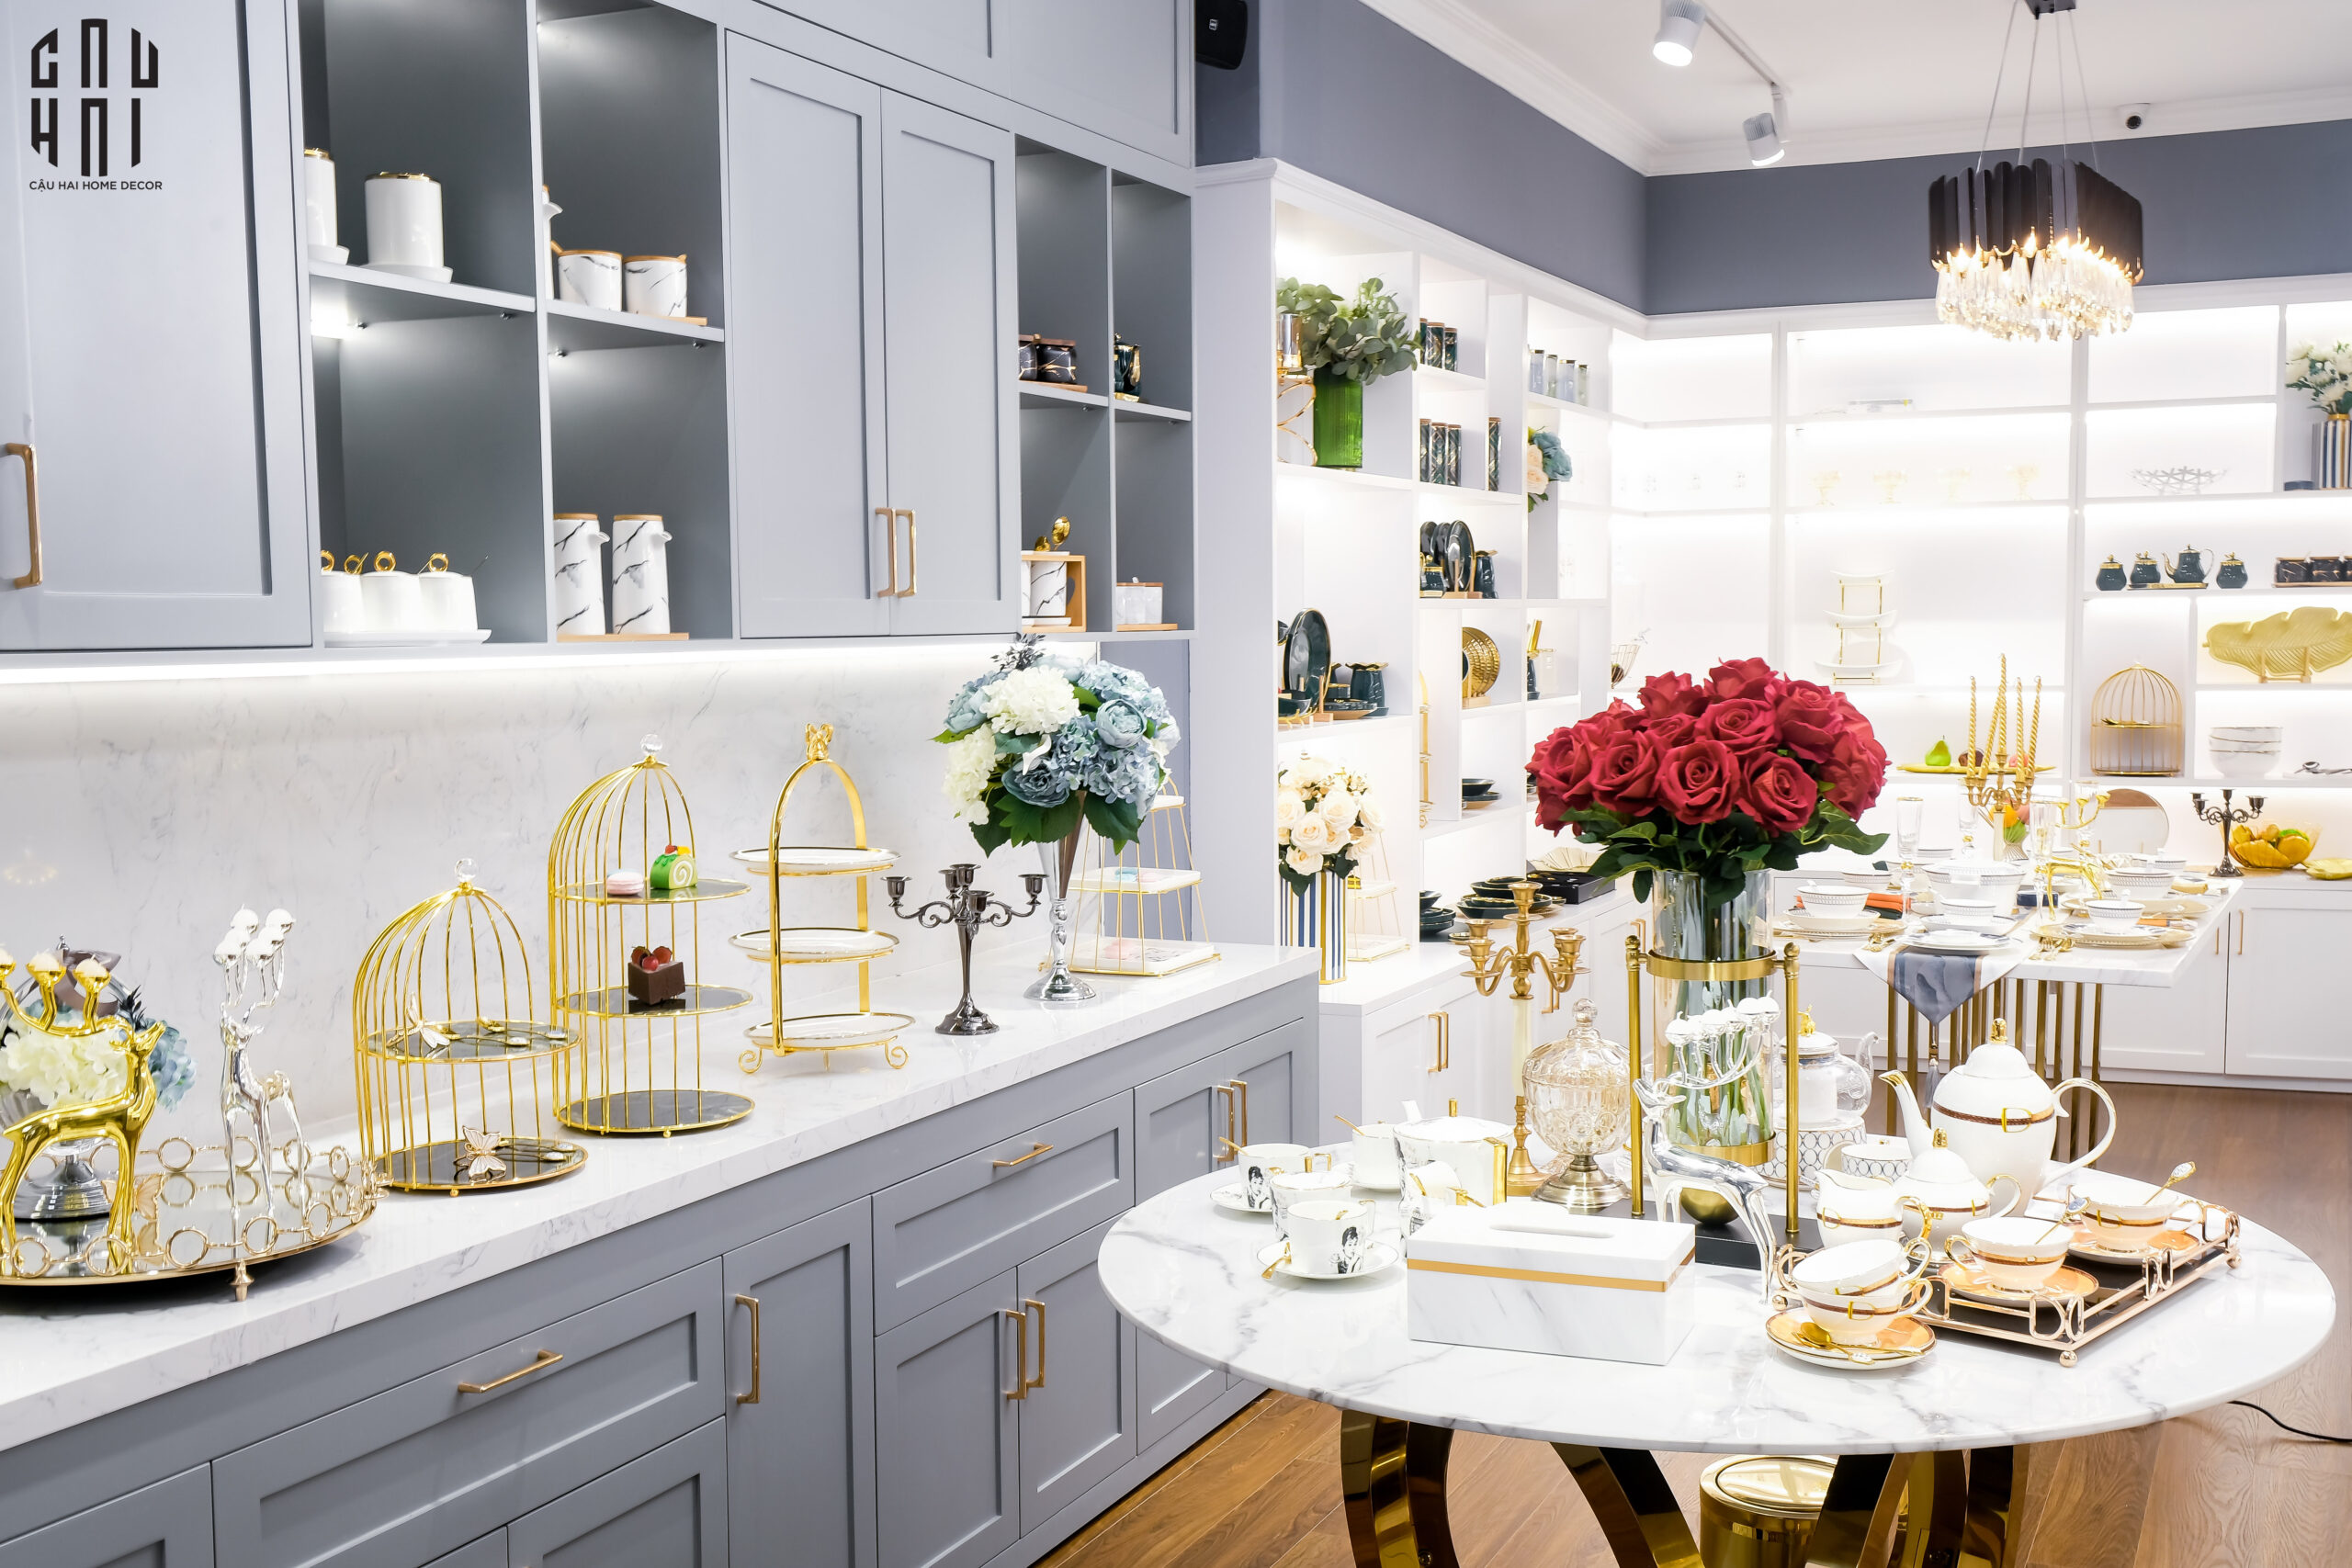 6 Home Decor Shops Around the World I'd Love to Visit